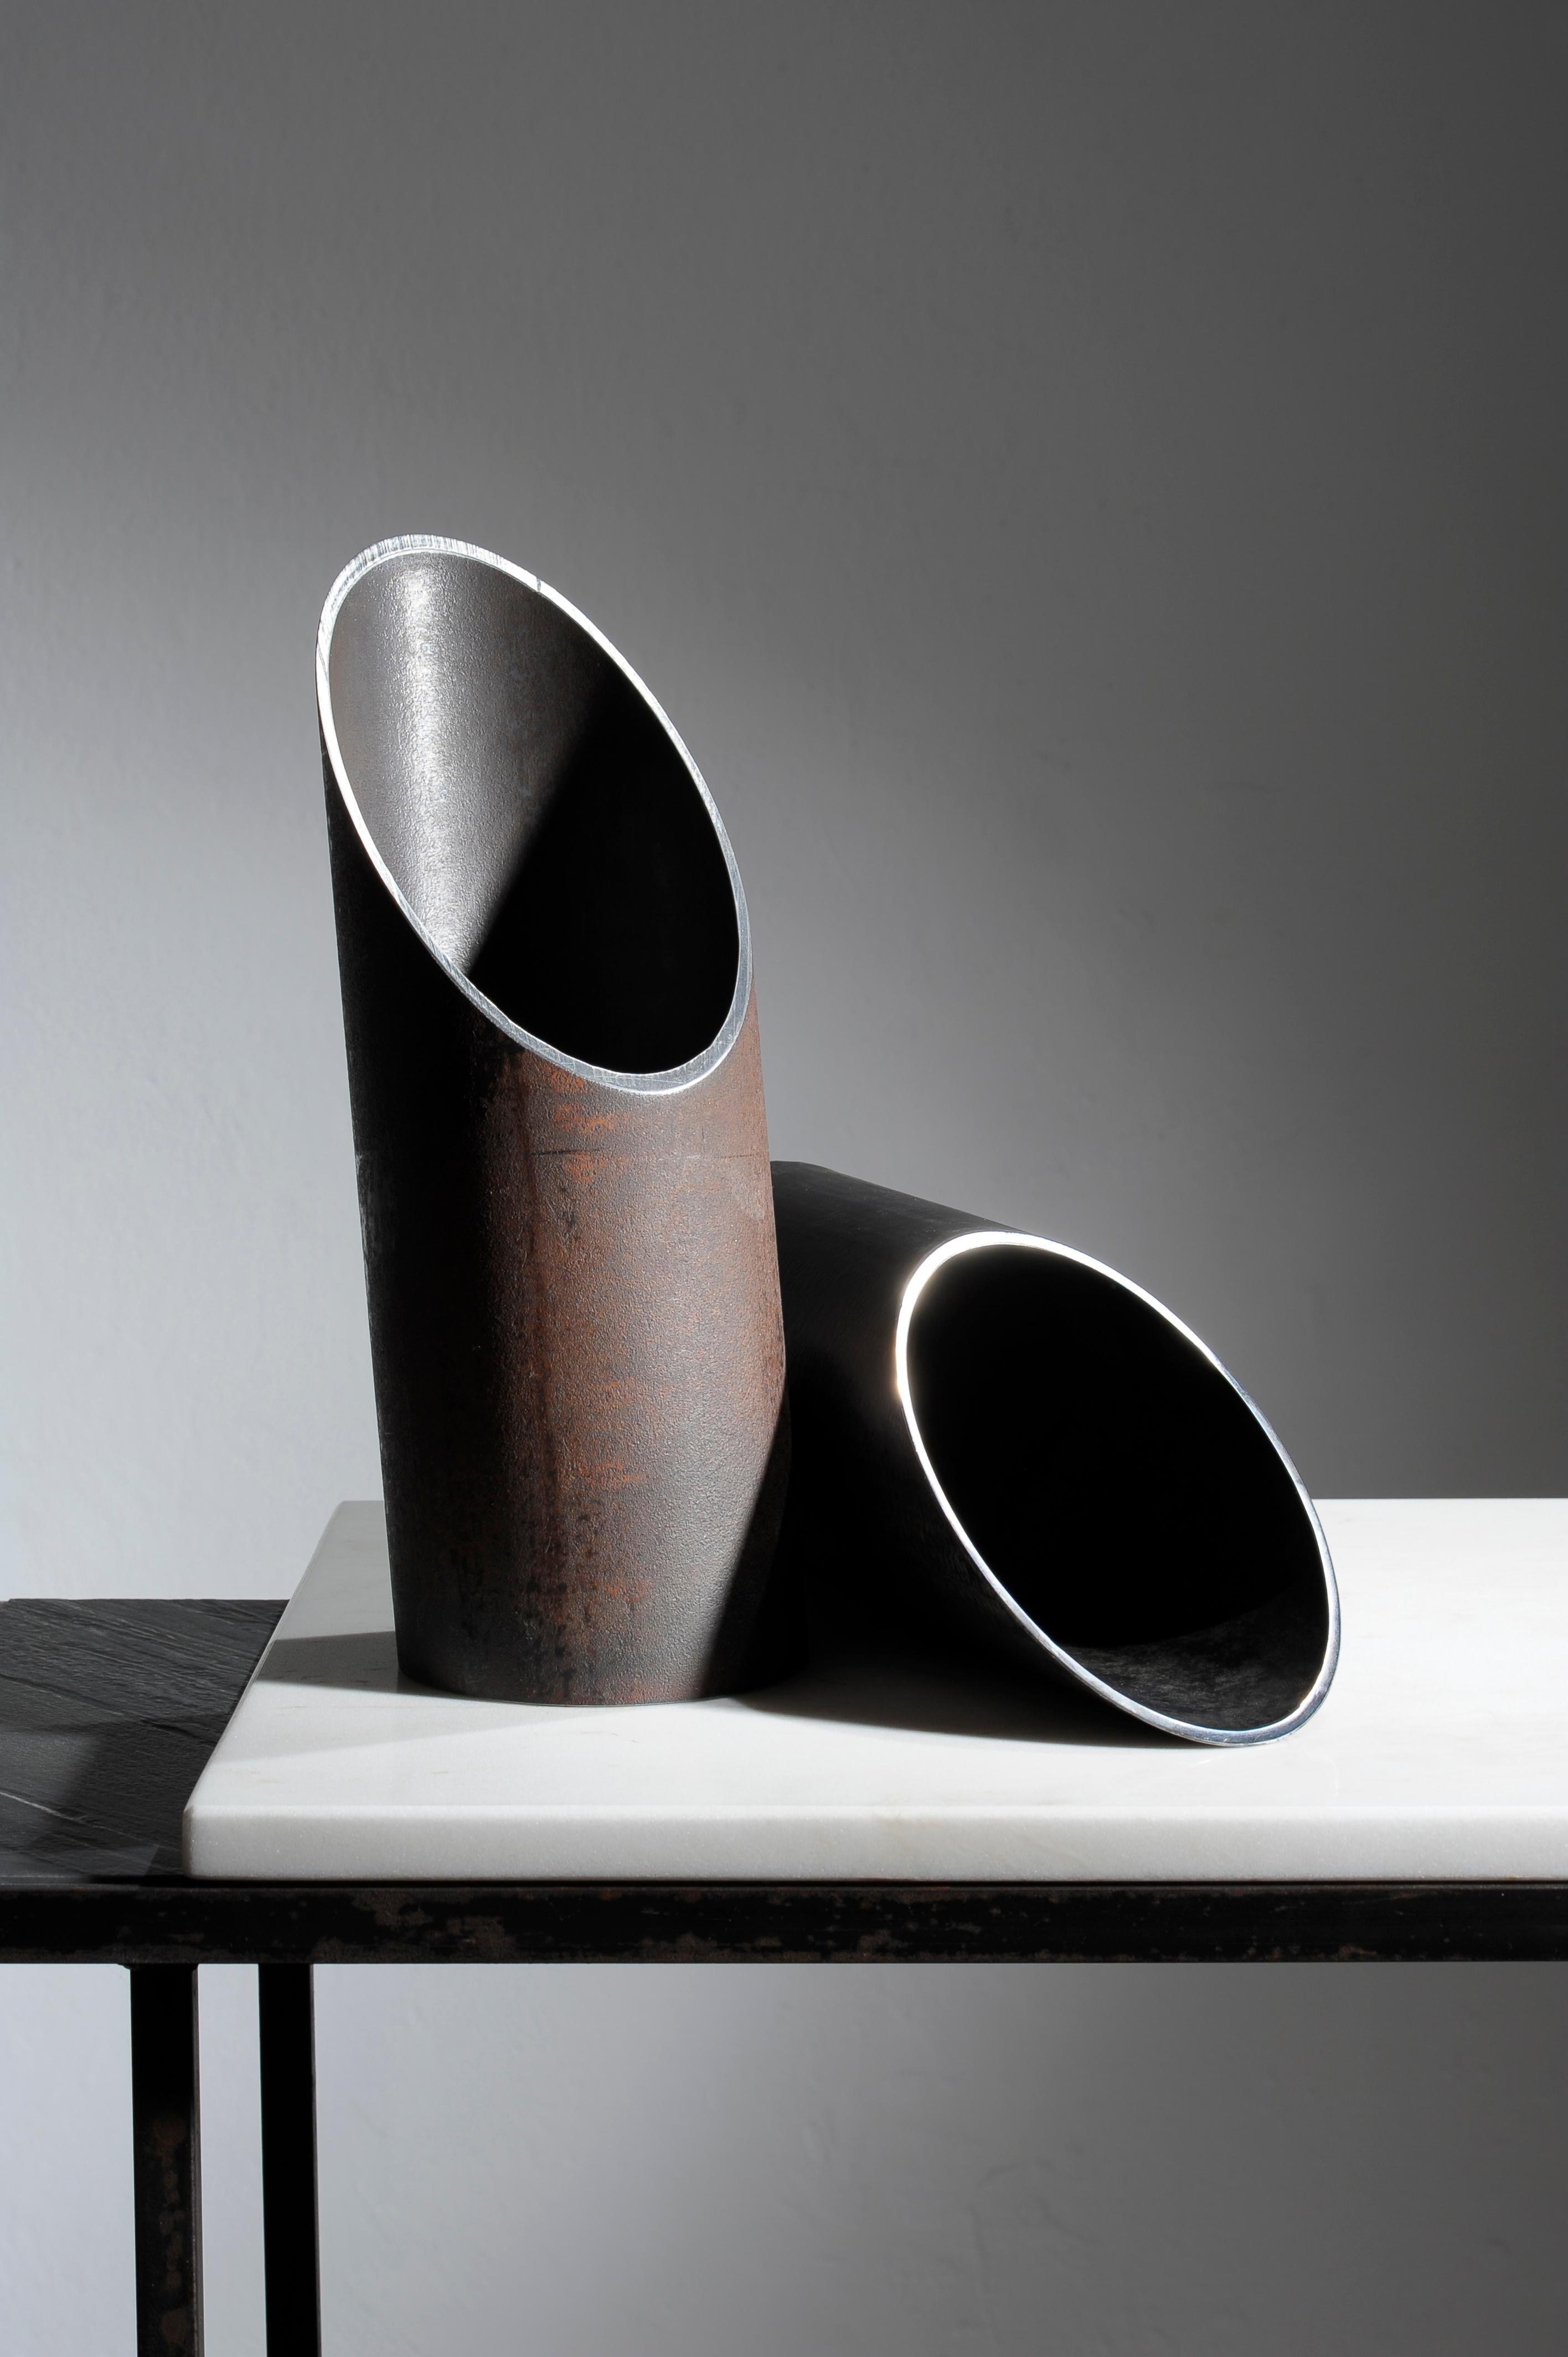 Pipe, pair of steel sculpted vases, signed by Lukasz Friedrich
Steel vases “Pipe”
Dimensions: D 12 x H 30 cm
Finish: black or rusty patina on steel, wax
Unique and signed.